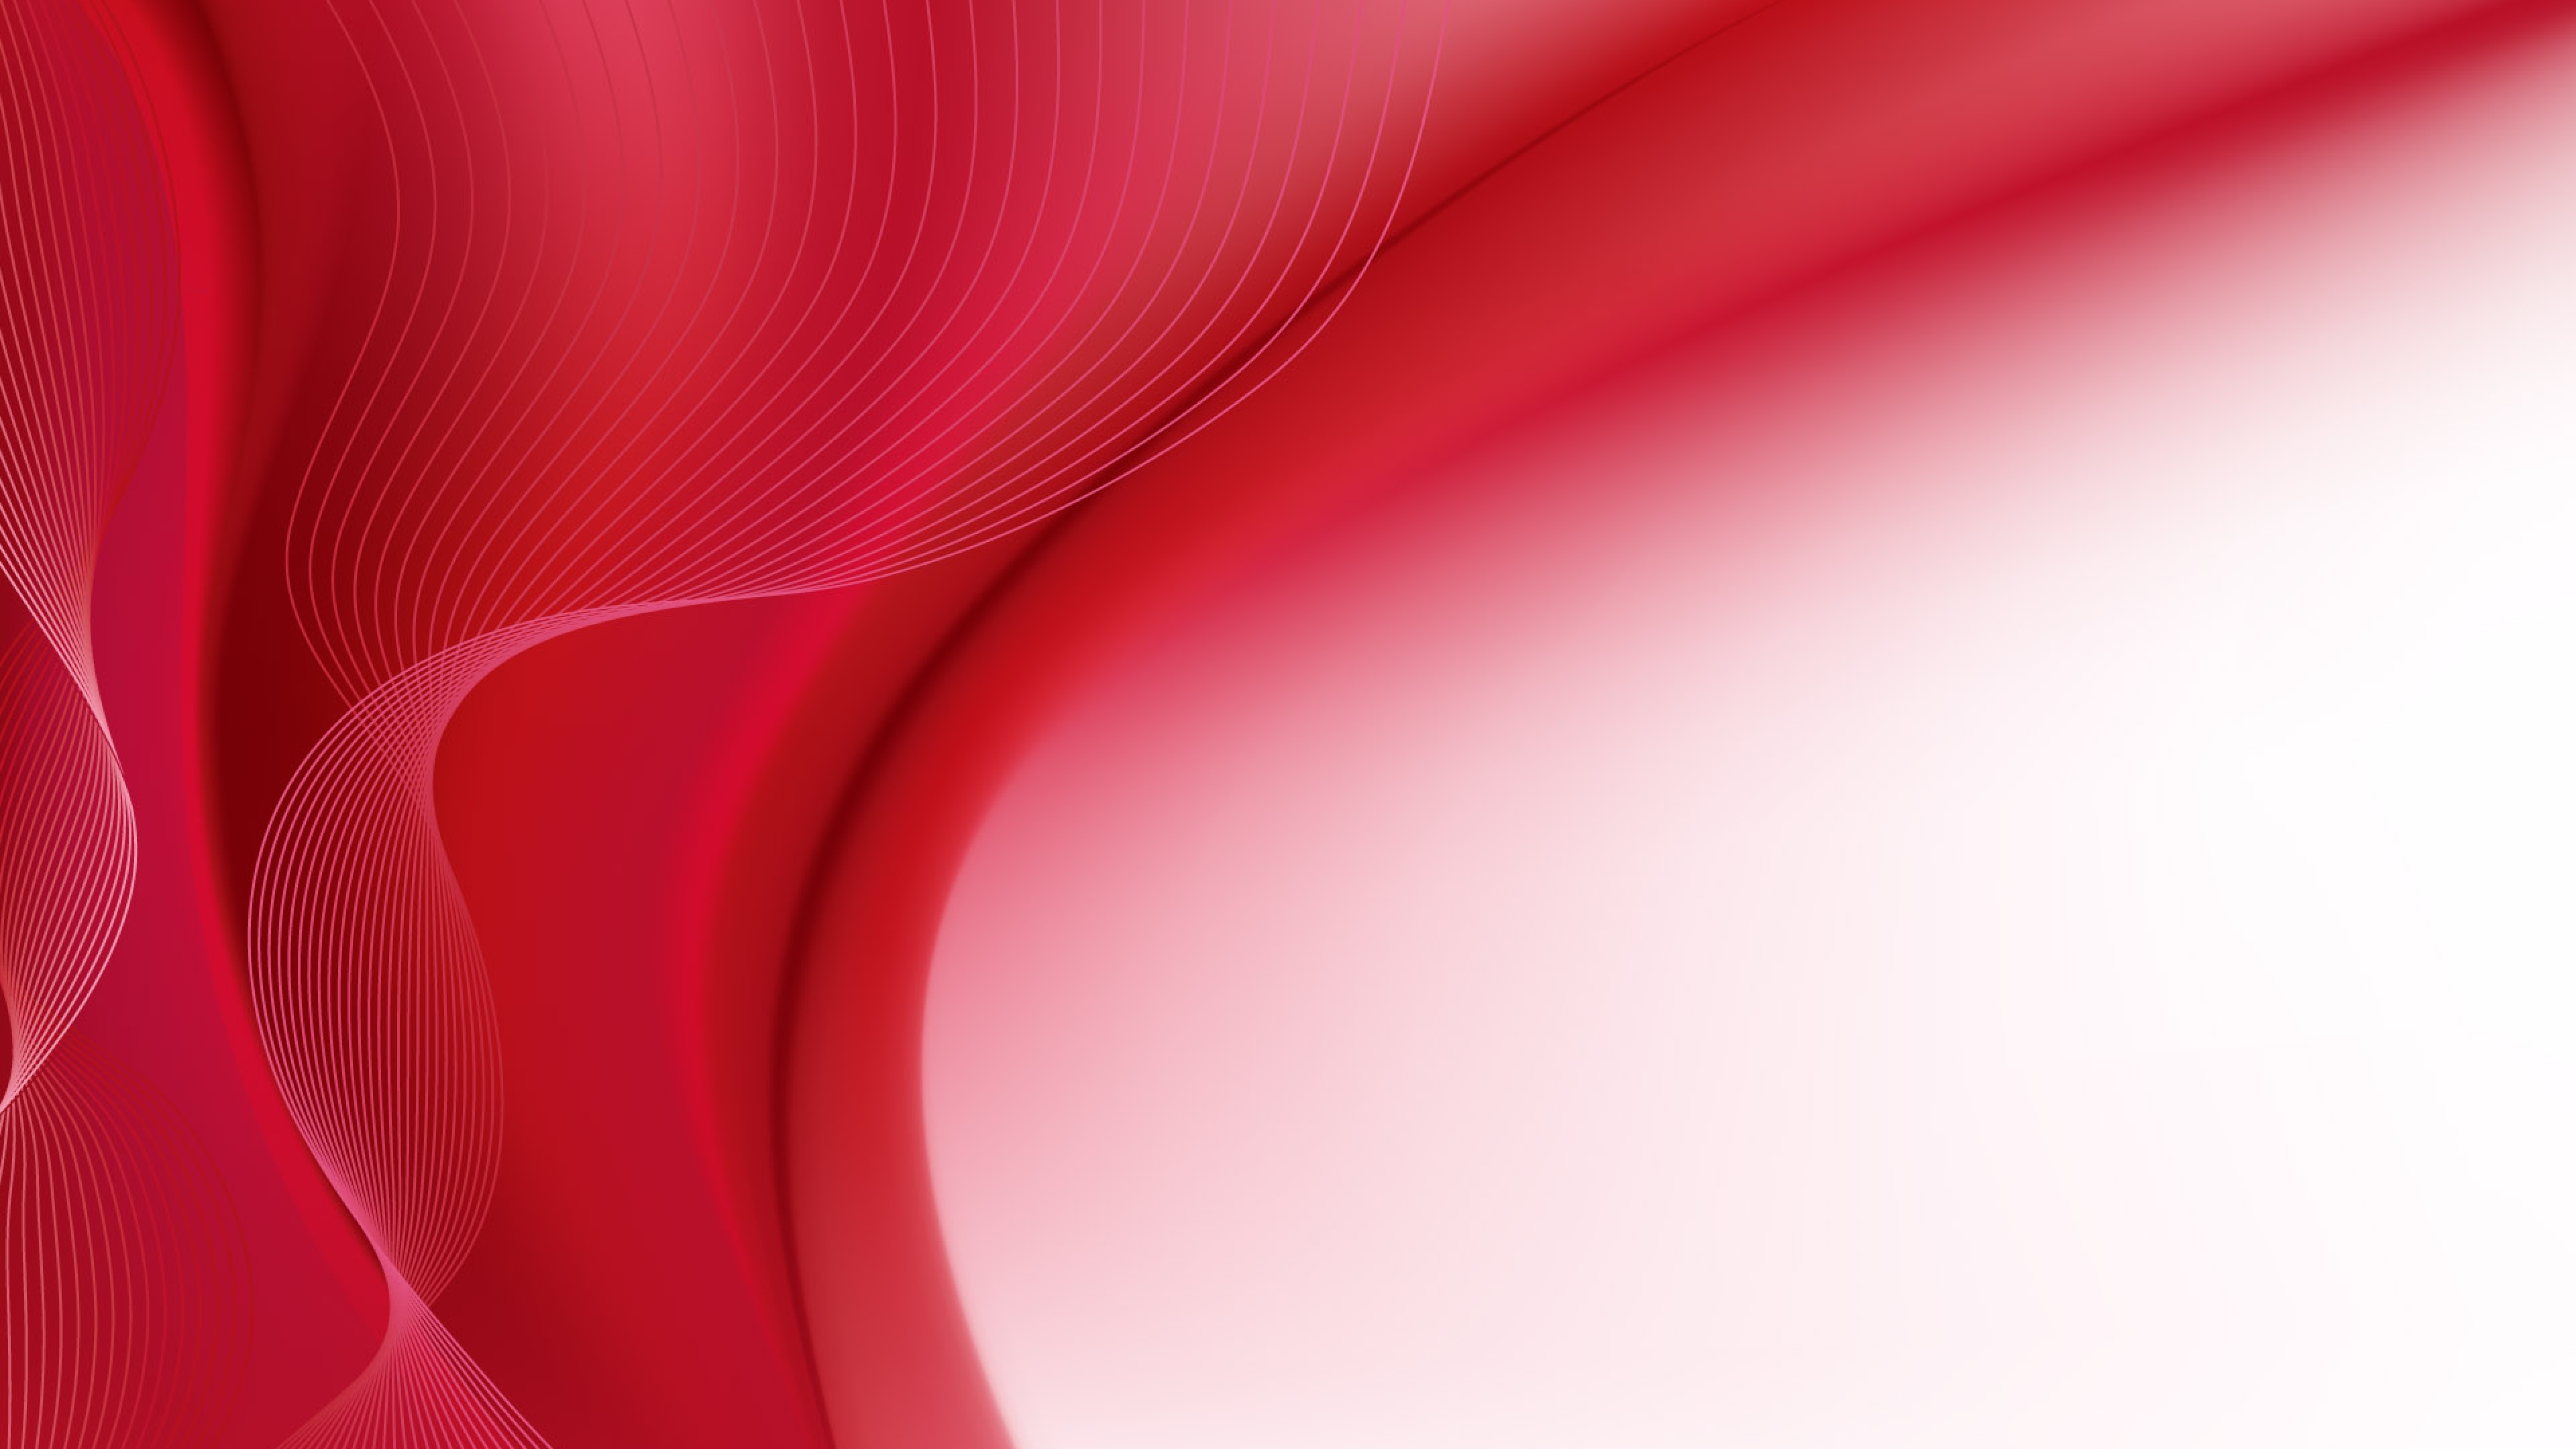 Red Background Wallpaper Design Art - Red And White Vector - 3840x2160